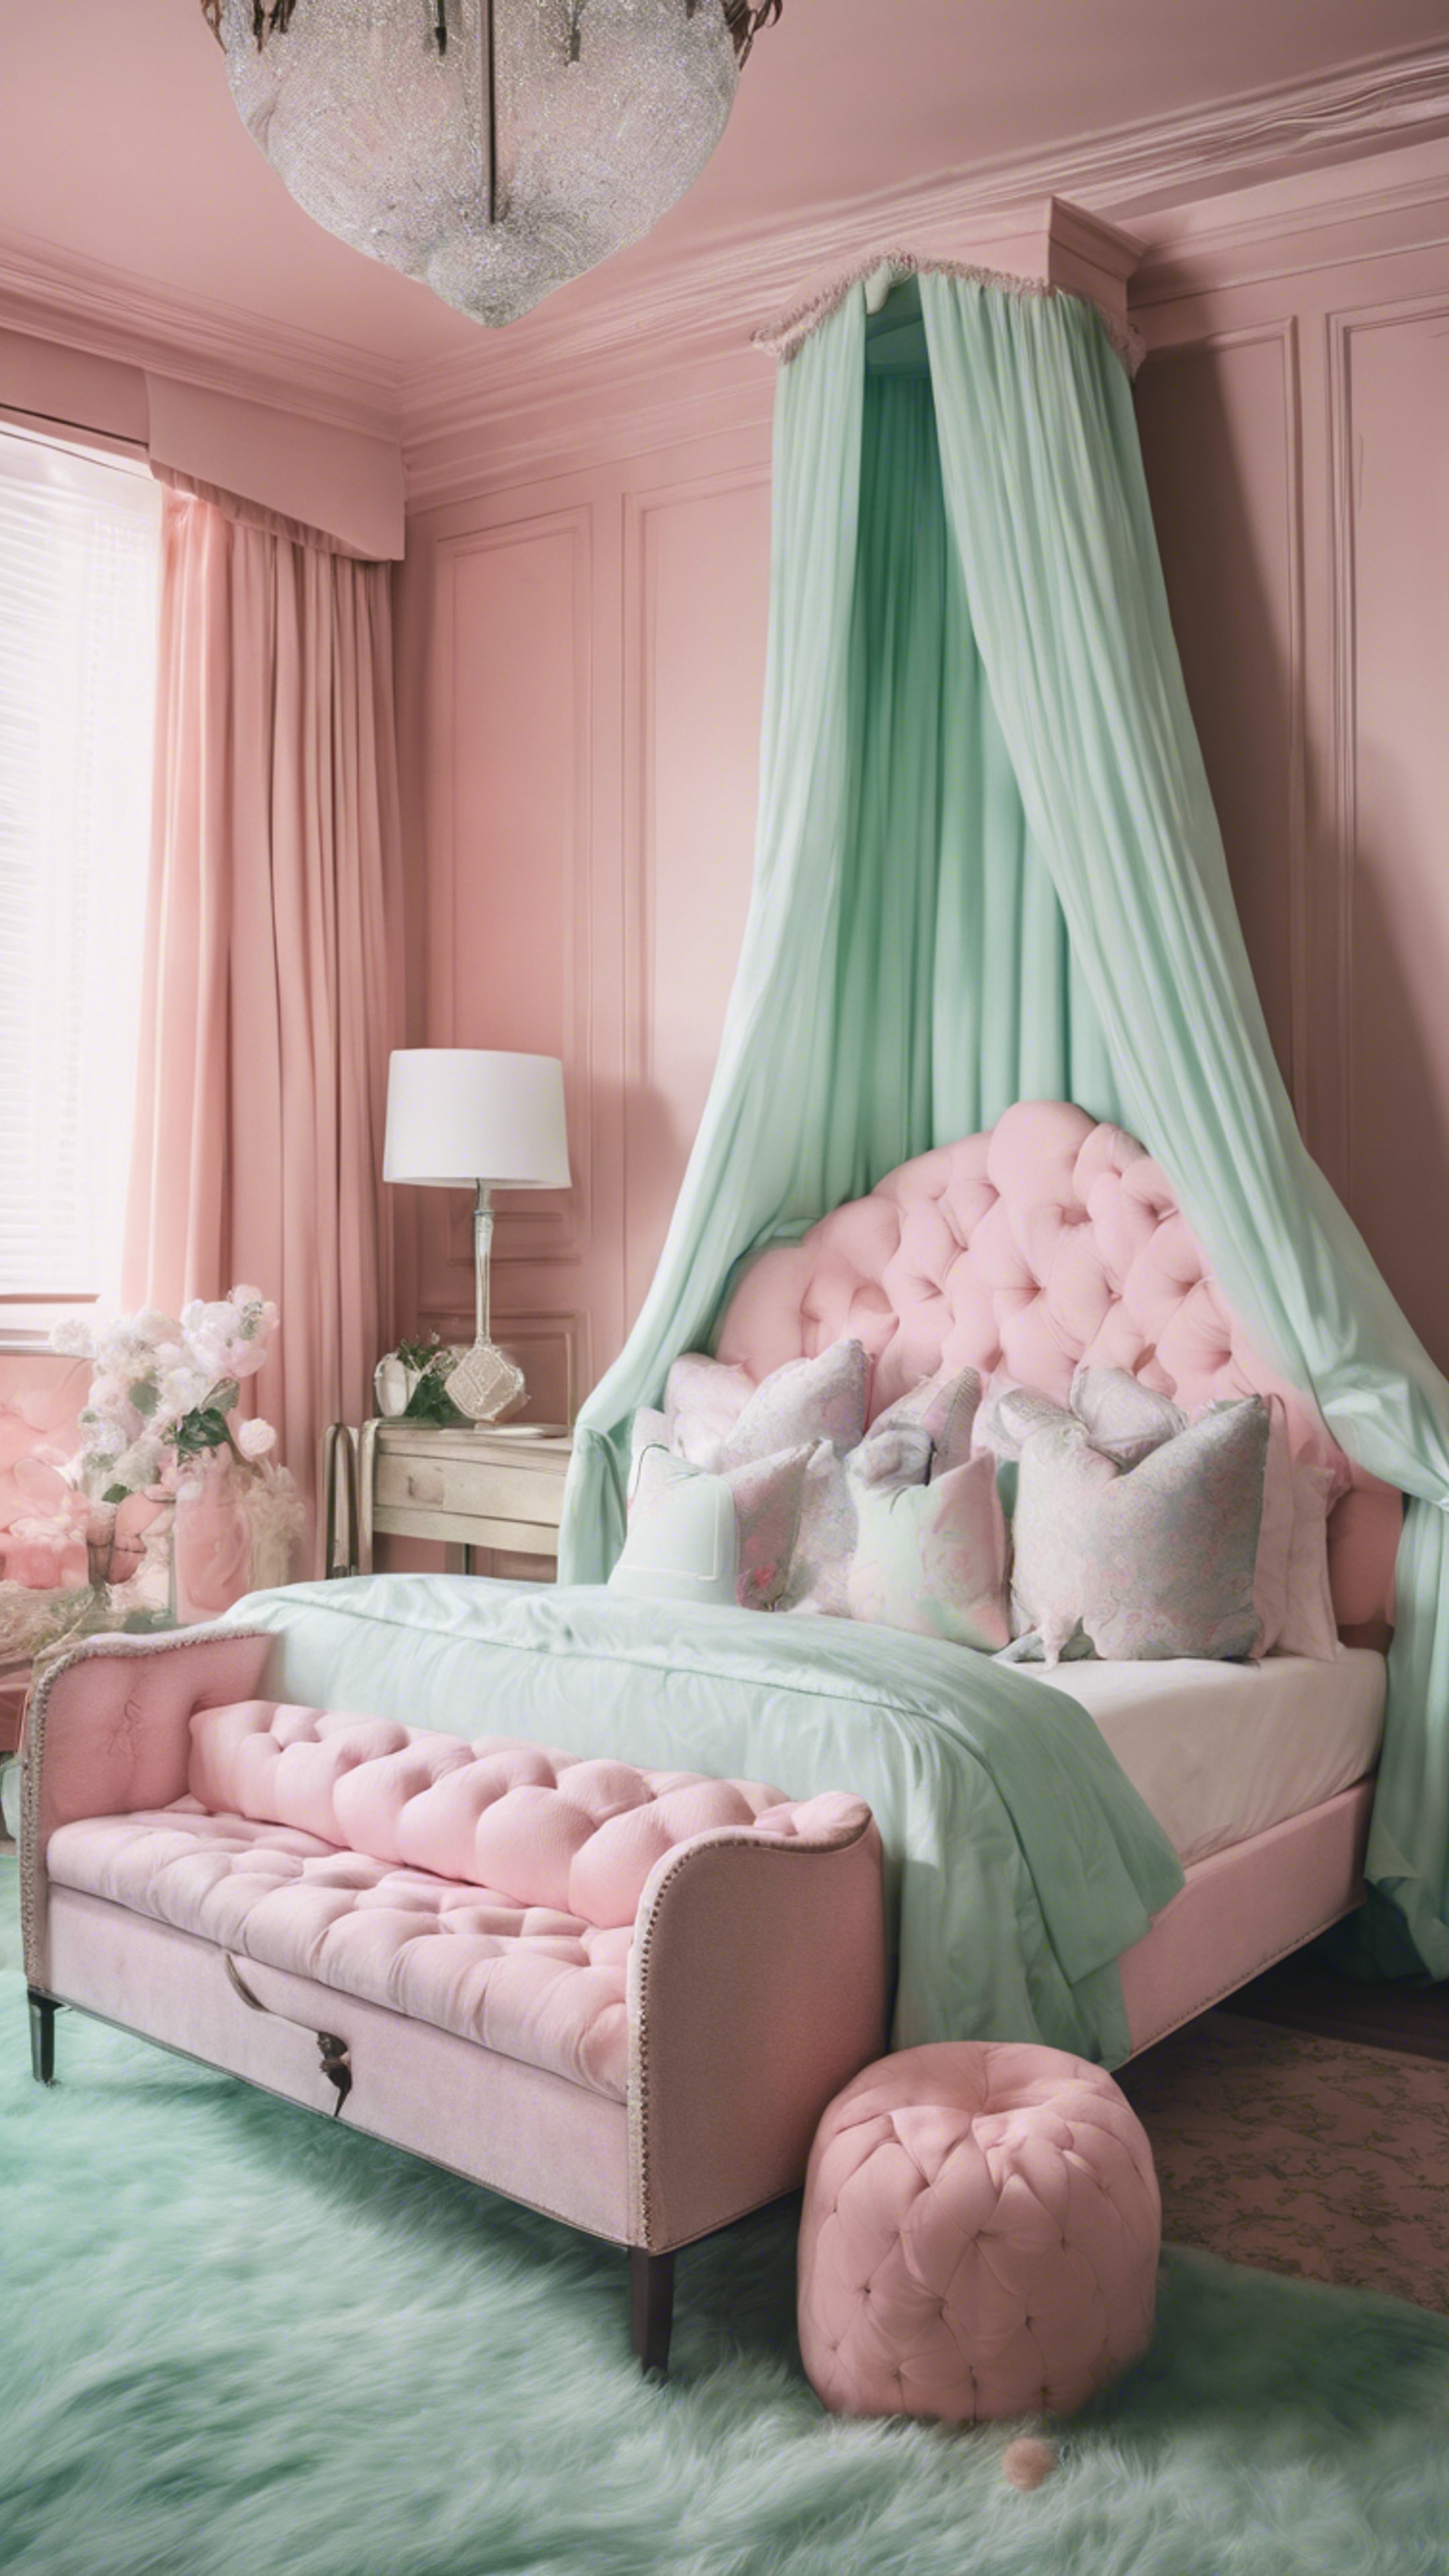 A sprawling pink and mint green preppy-style bedroom with a canopy bed and monogrammed pillows. Taustakuva[80ed71ae36e84fc093e2]